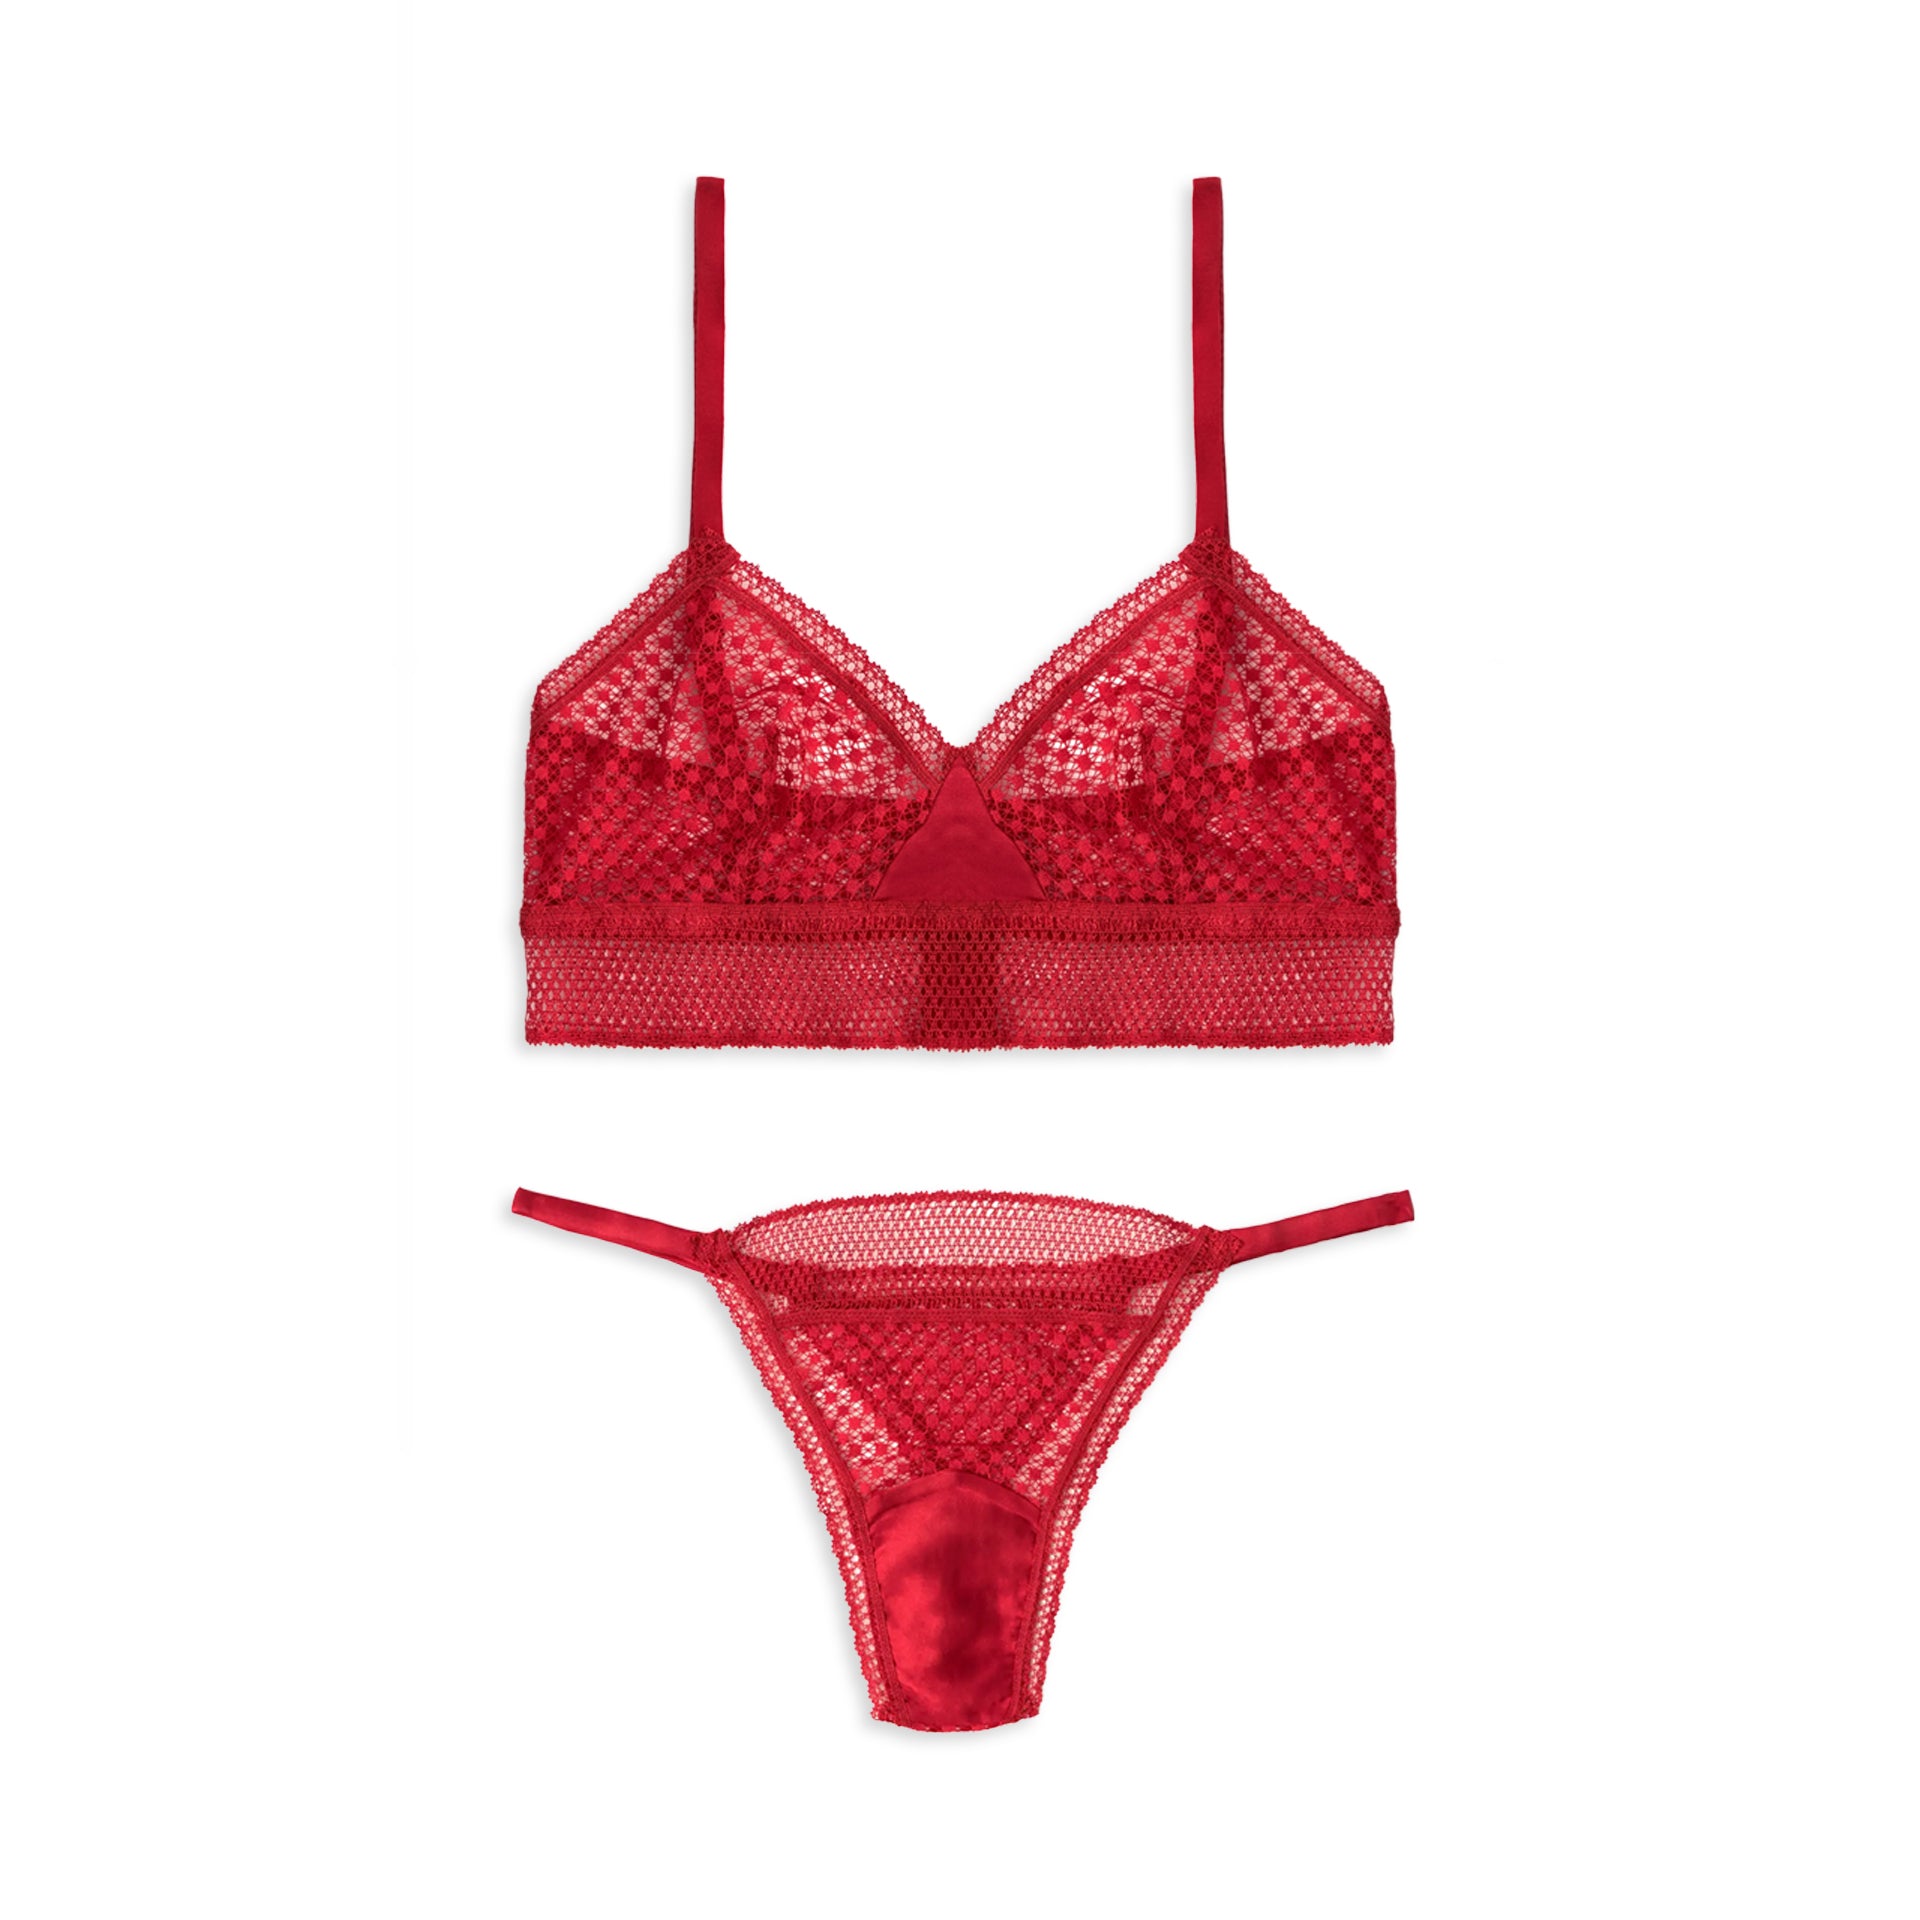 Red Mesh Triangle Bralette With Wide Black Band Sheer Mesh Lingerie for  Women -  Canada